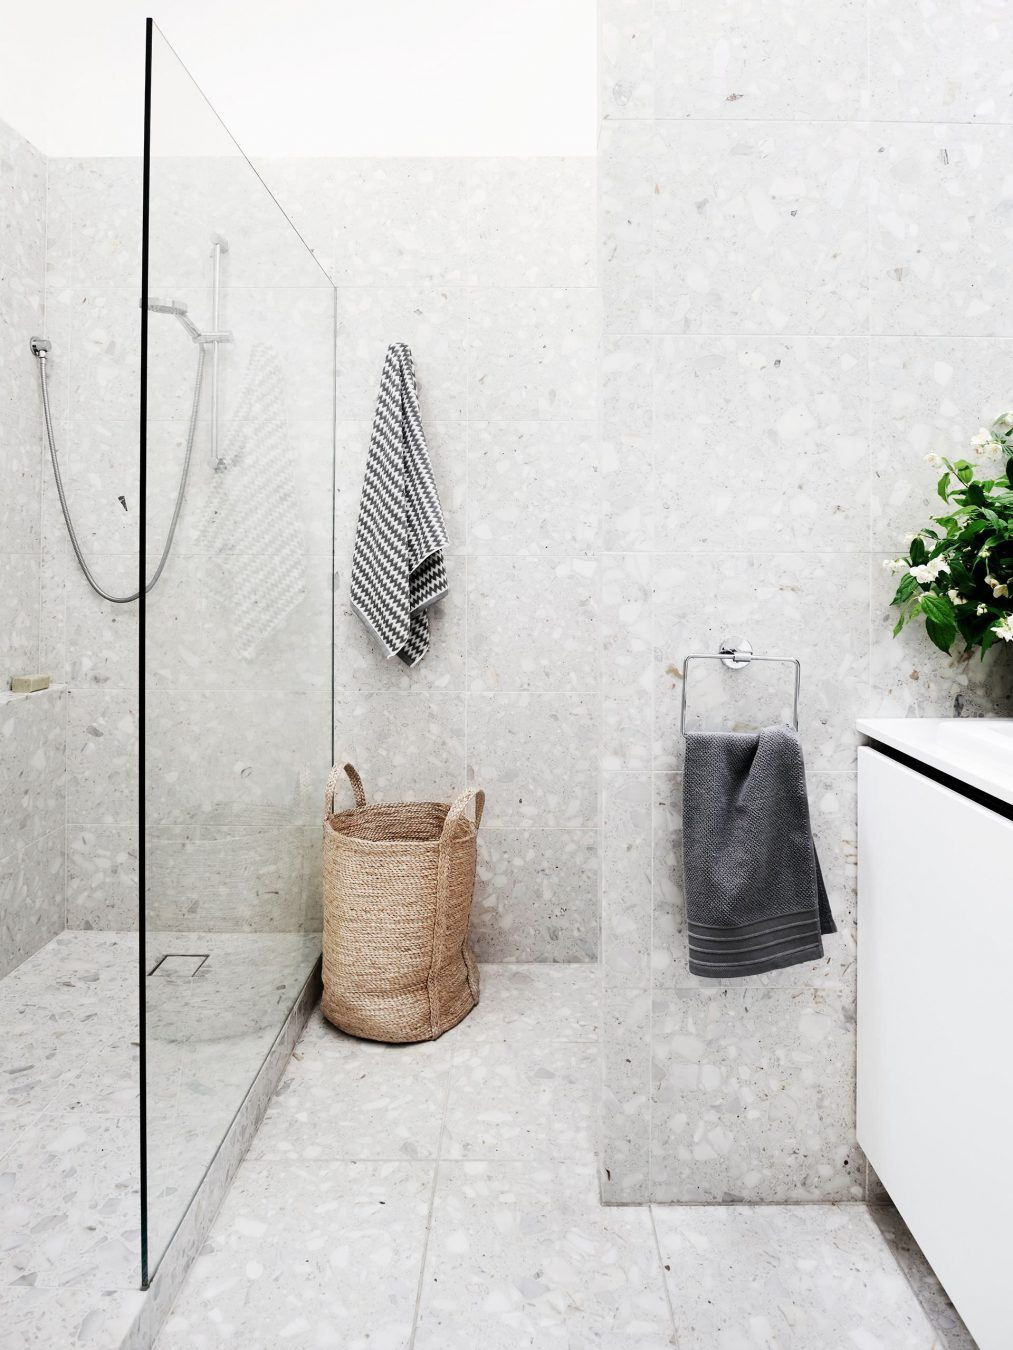 8' By 8' Bathroom Designs
 Terrazzo Look Tiles – the Feature You Didn’t Even Know Was